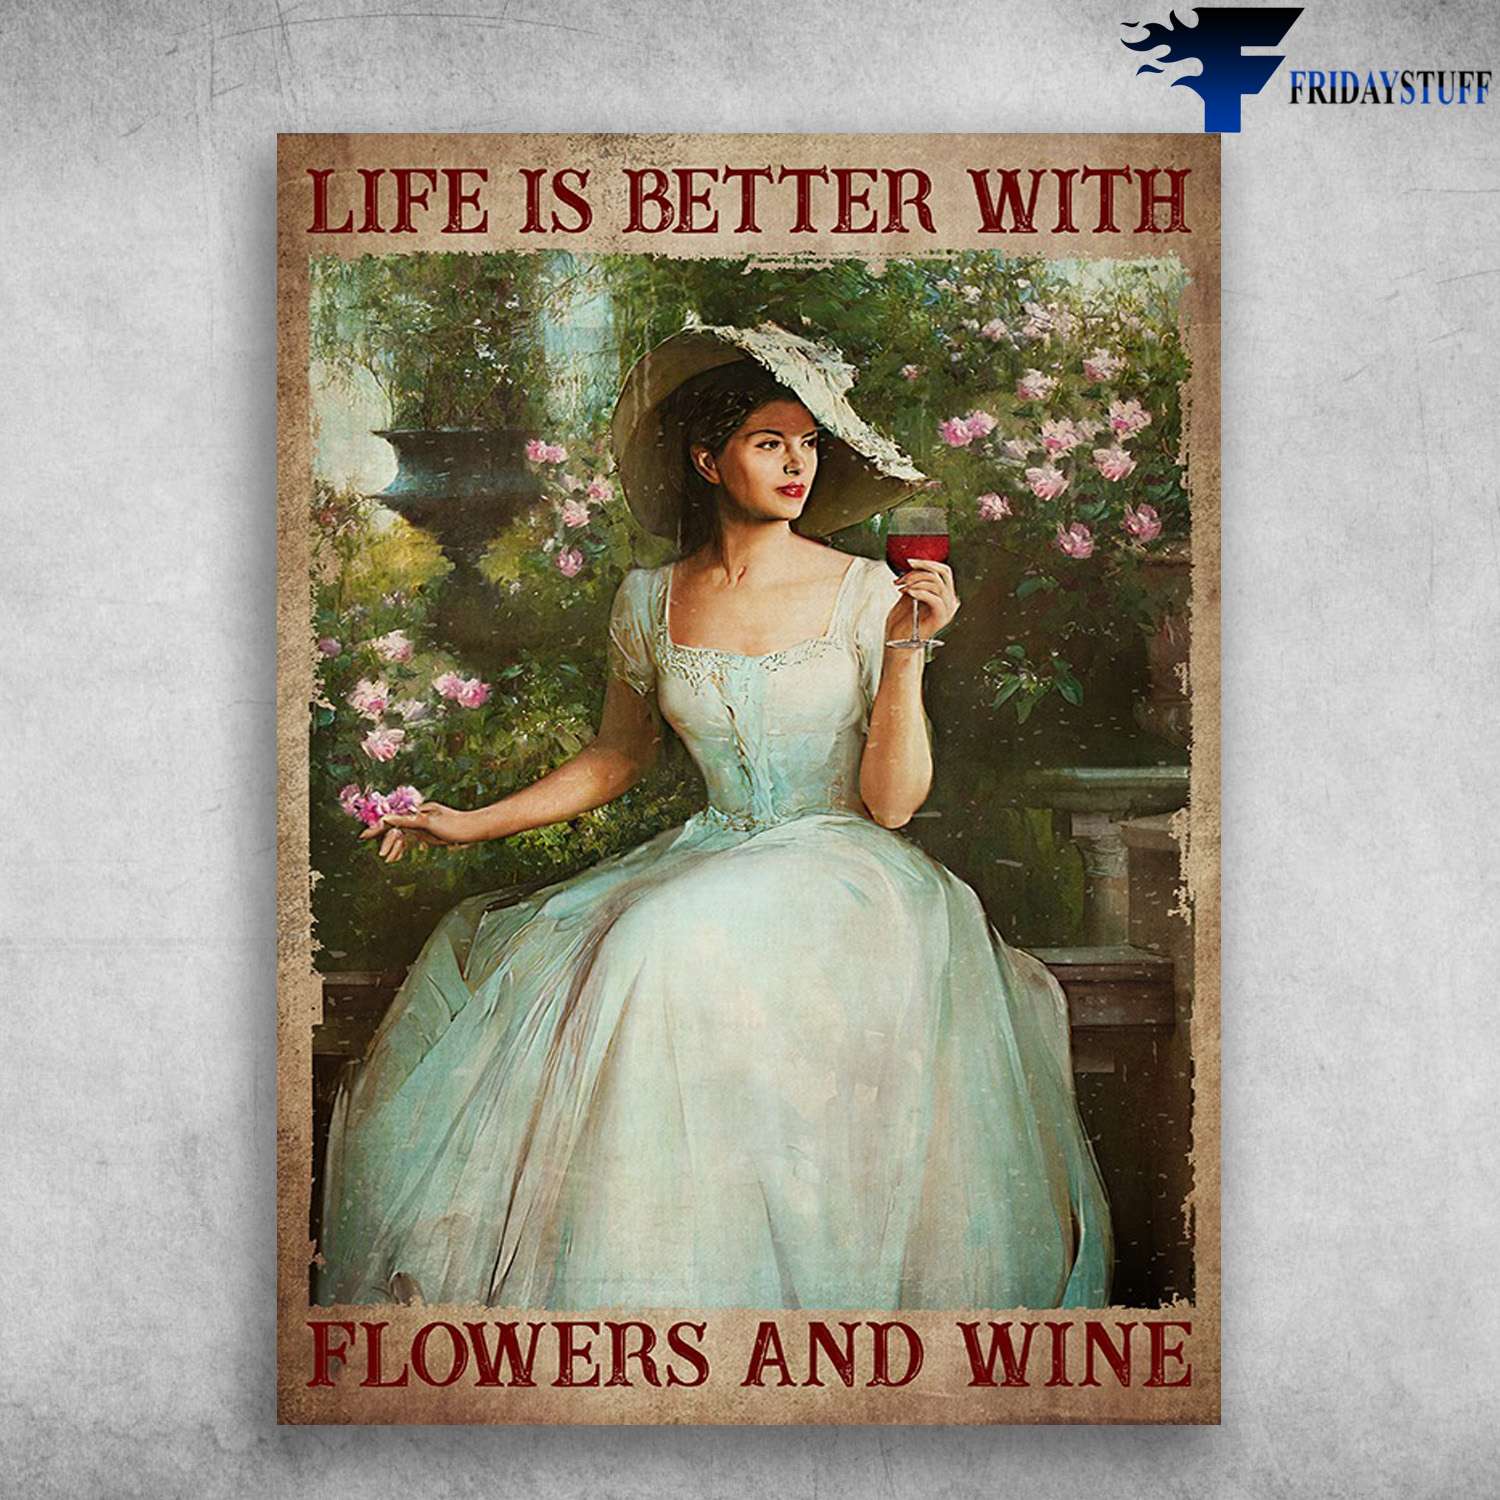 Girl Drinks Wine - Life Is Better With, Flowers And Wine